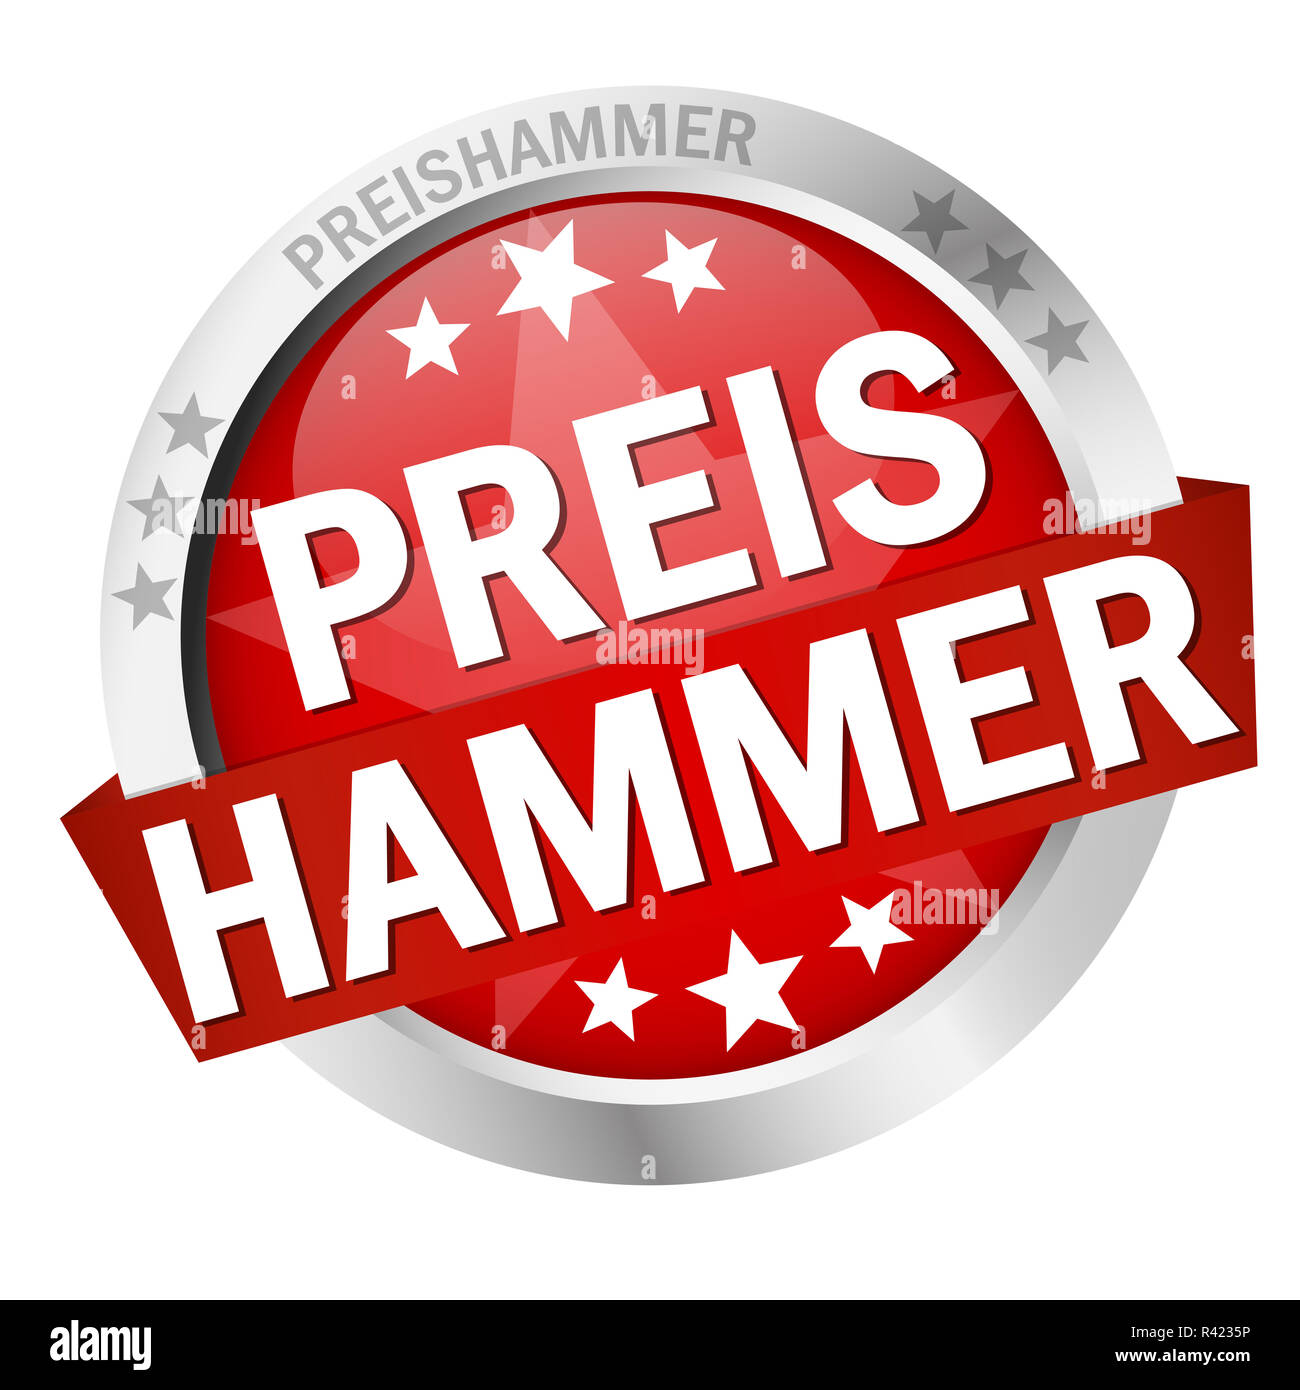 Preishammer High Resolution Stock Photography and Images - Alamy